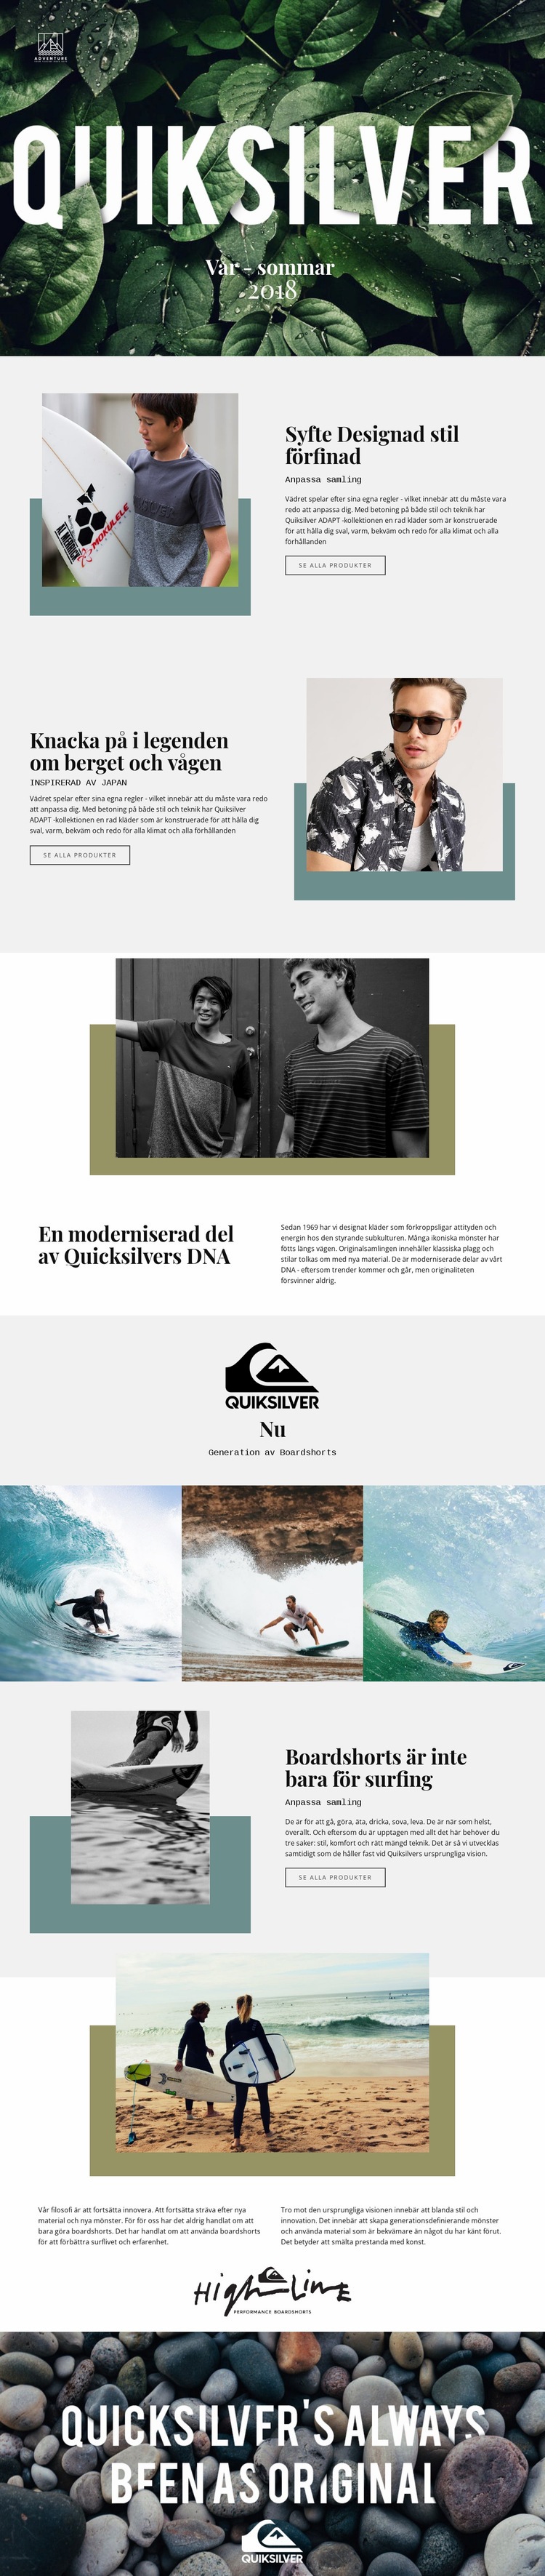 Quiksilver HTML-mall